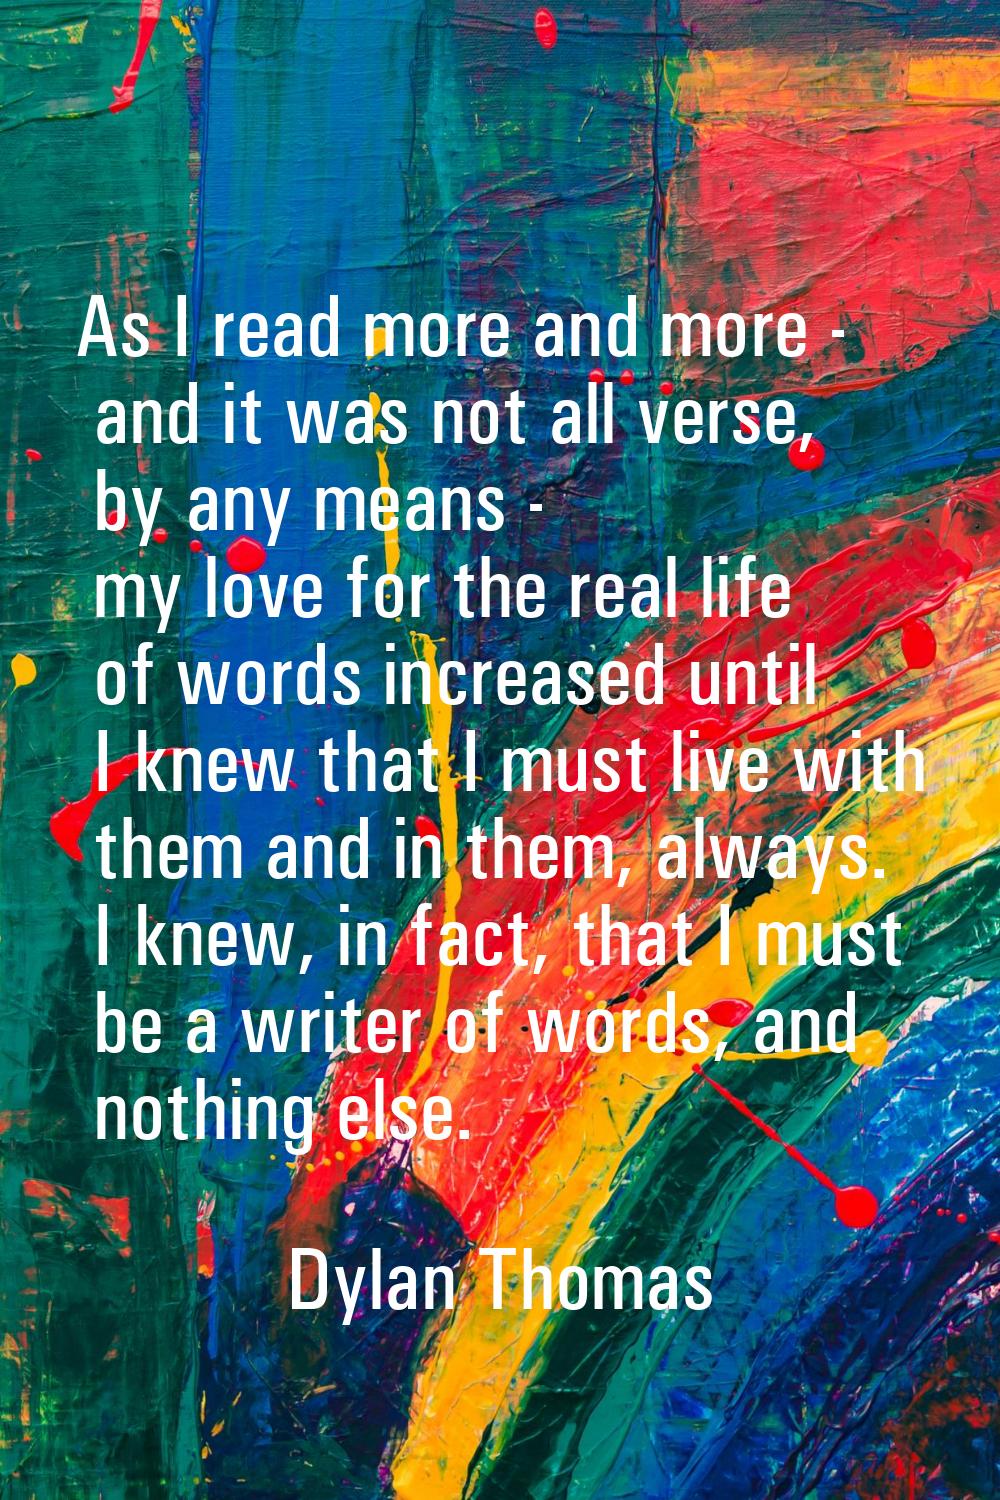 As I read more and more - and it was not all verse, by any means - my love for the real life of wor